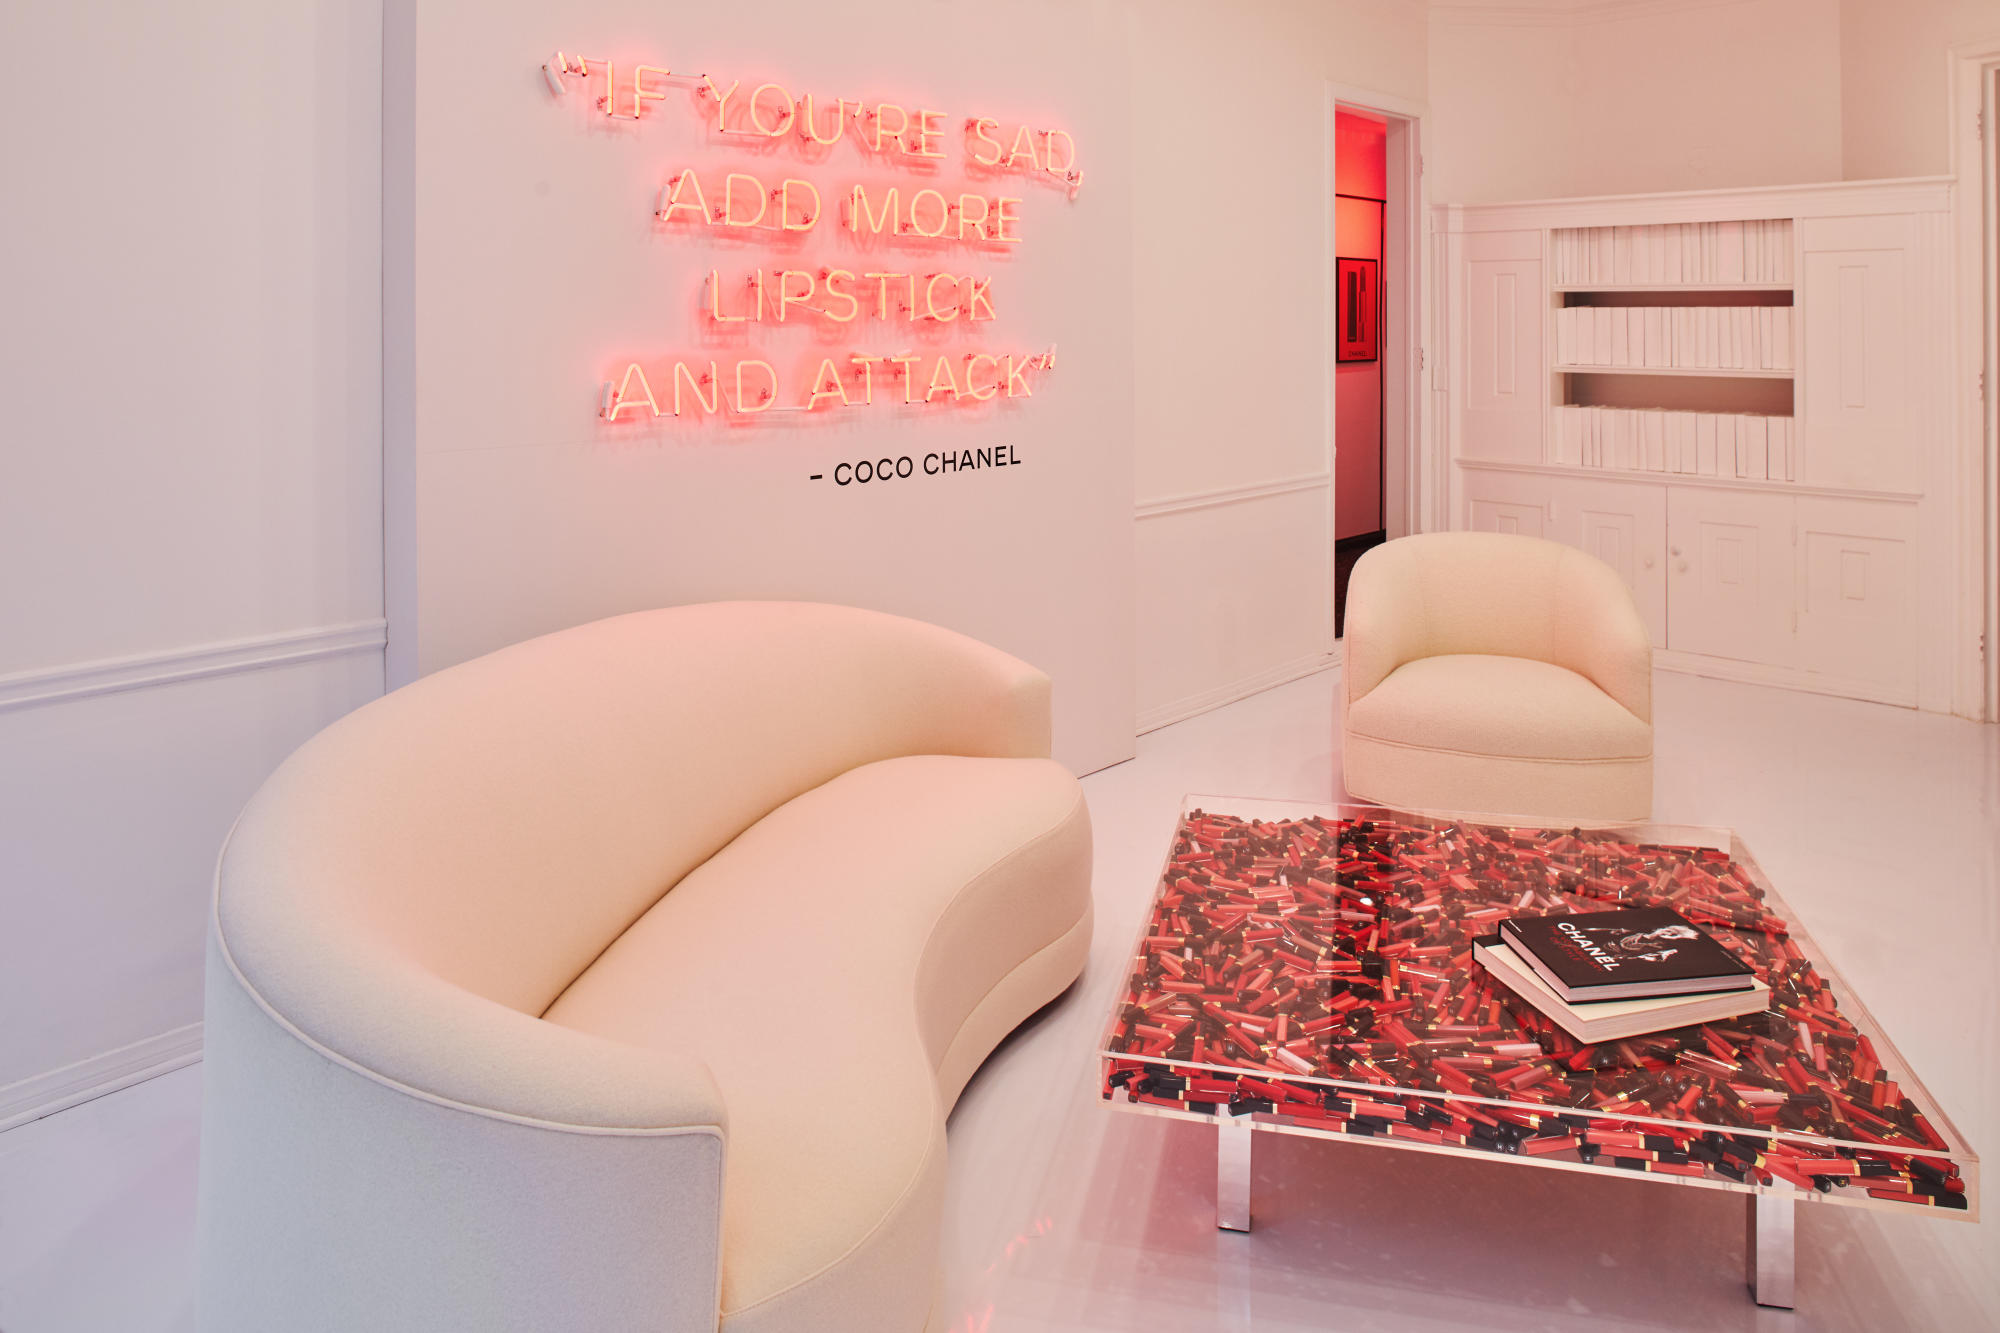 HERE’S WHY THE DELIGHTFUL AND DREAMY CHANEL BEAUTY HOUSE WAS ANYTHING BUT INSTA-BAIT